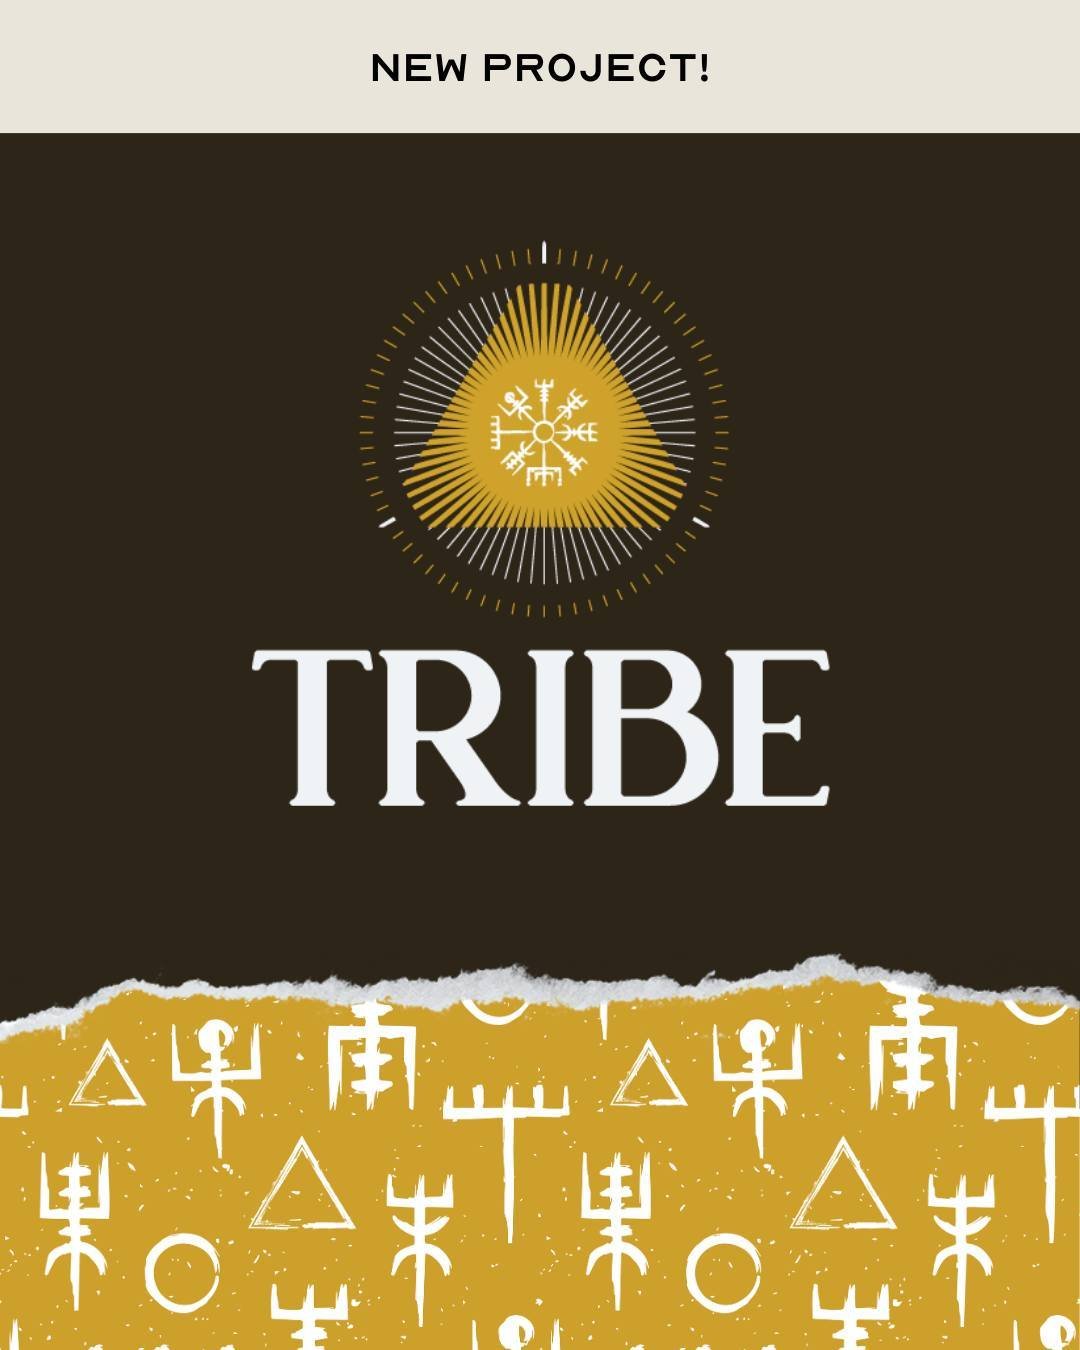 We are excited to share our latest design project with TRIBE, a movement studio in Baltimore dedicated to embracing the full human experience through embodiment. We are so honored to have been a part this brand and our design aims to reflect the pass